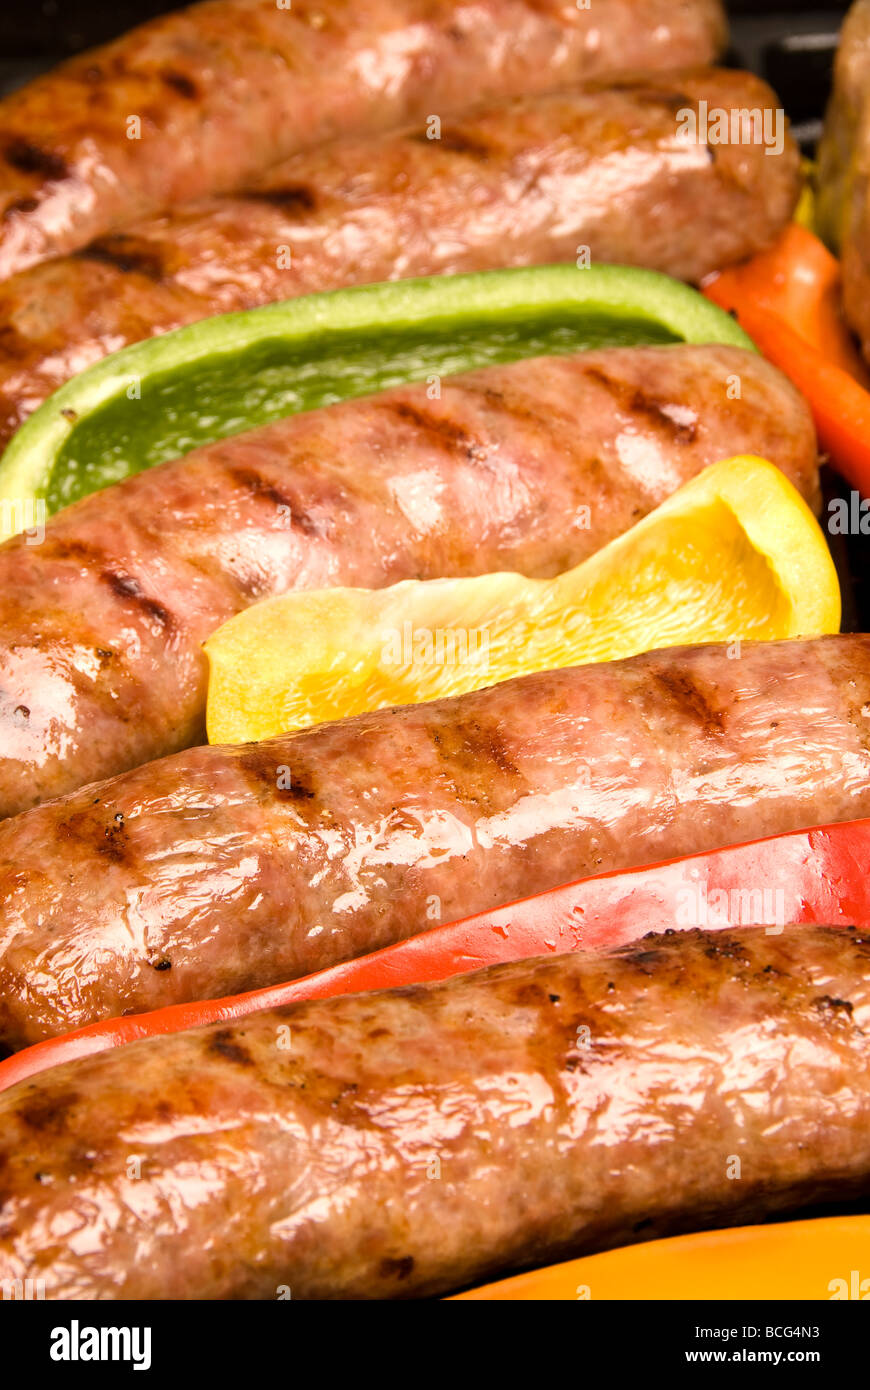 A row of grilled barbecued bratwurst with bell pepper garnish ready to serve Stock Photo